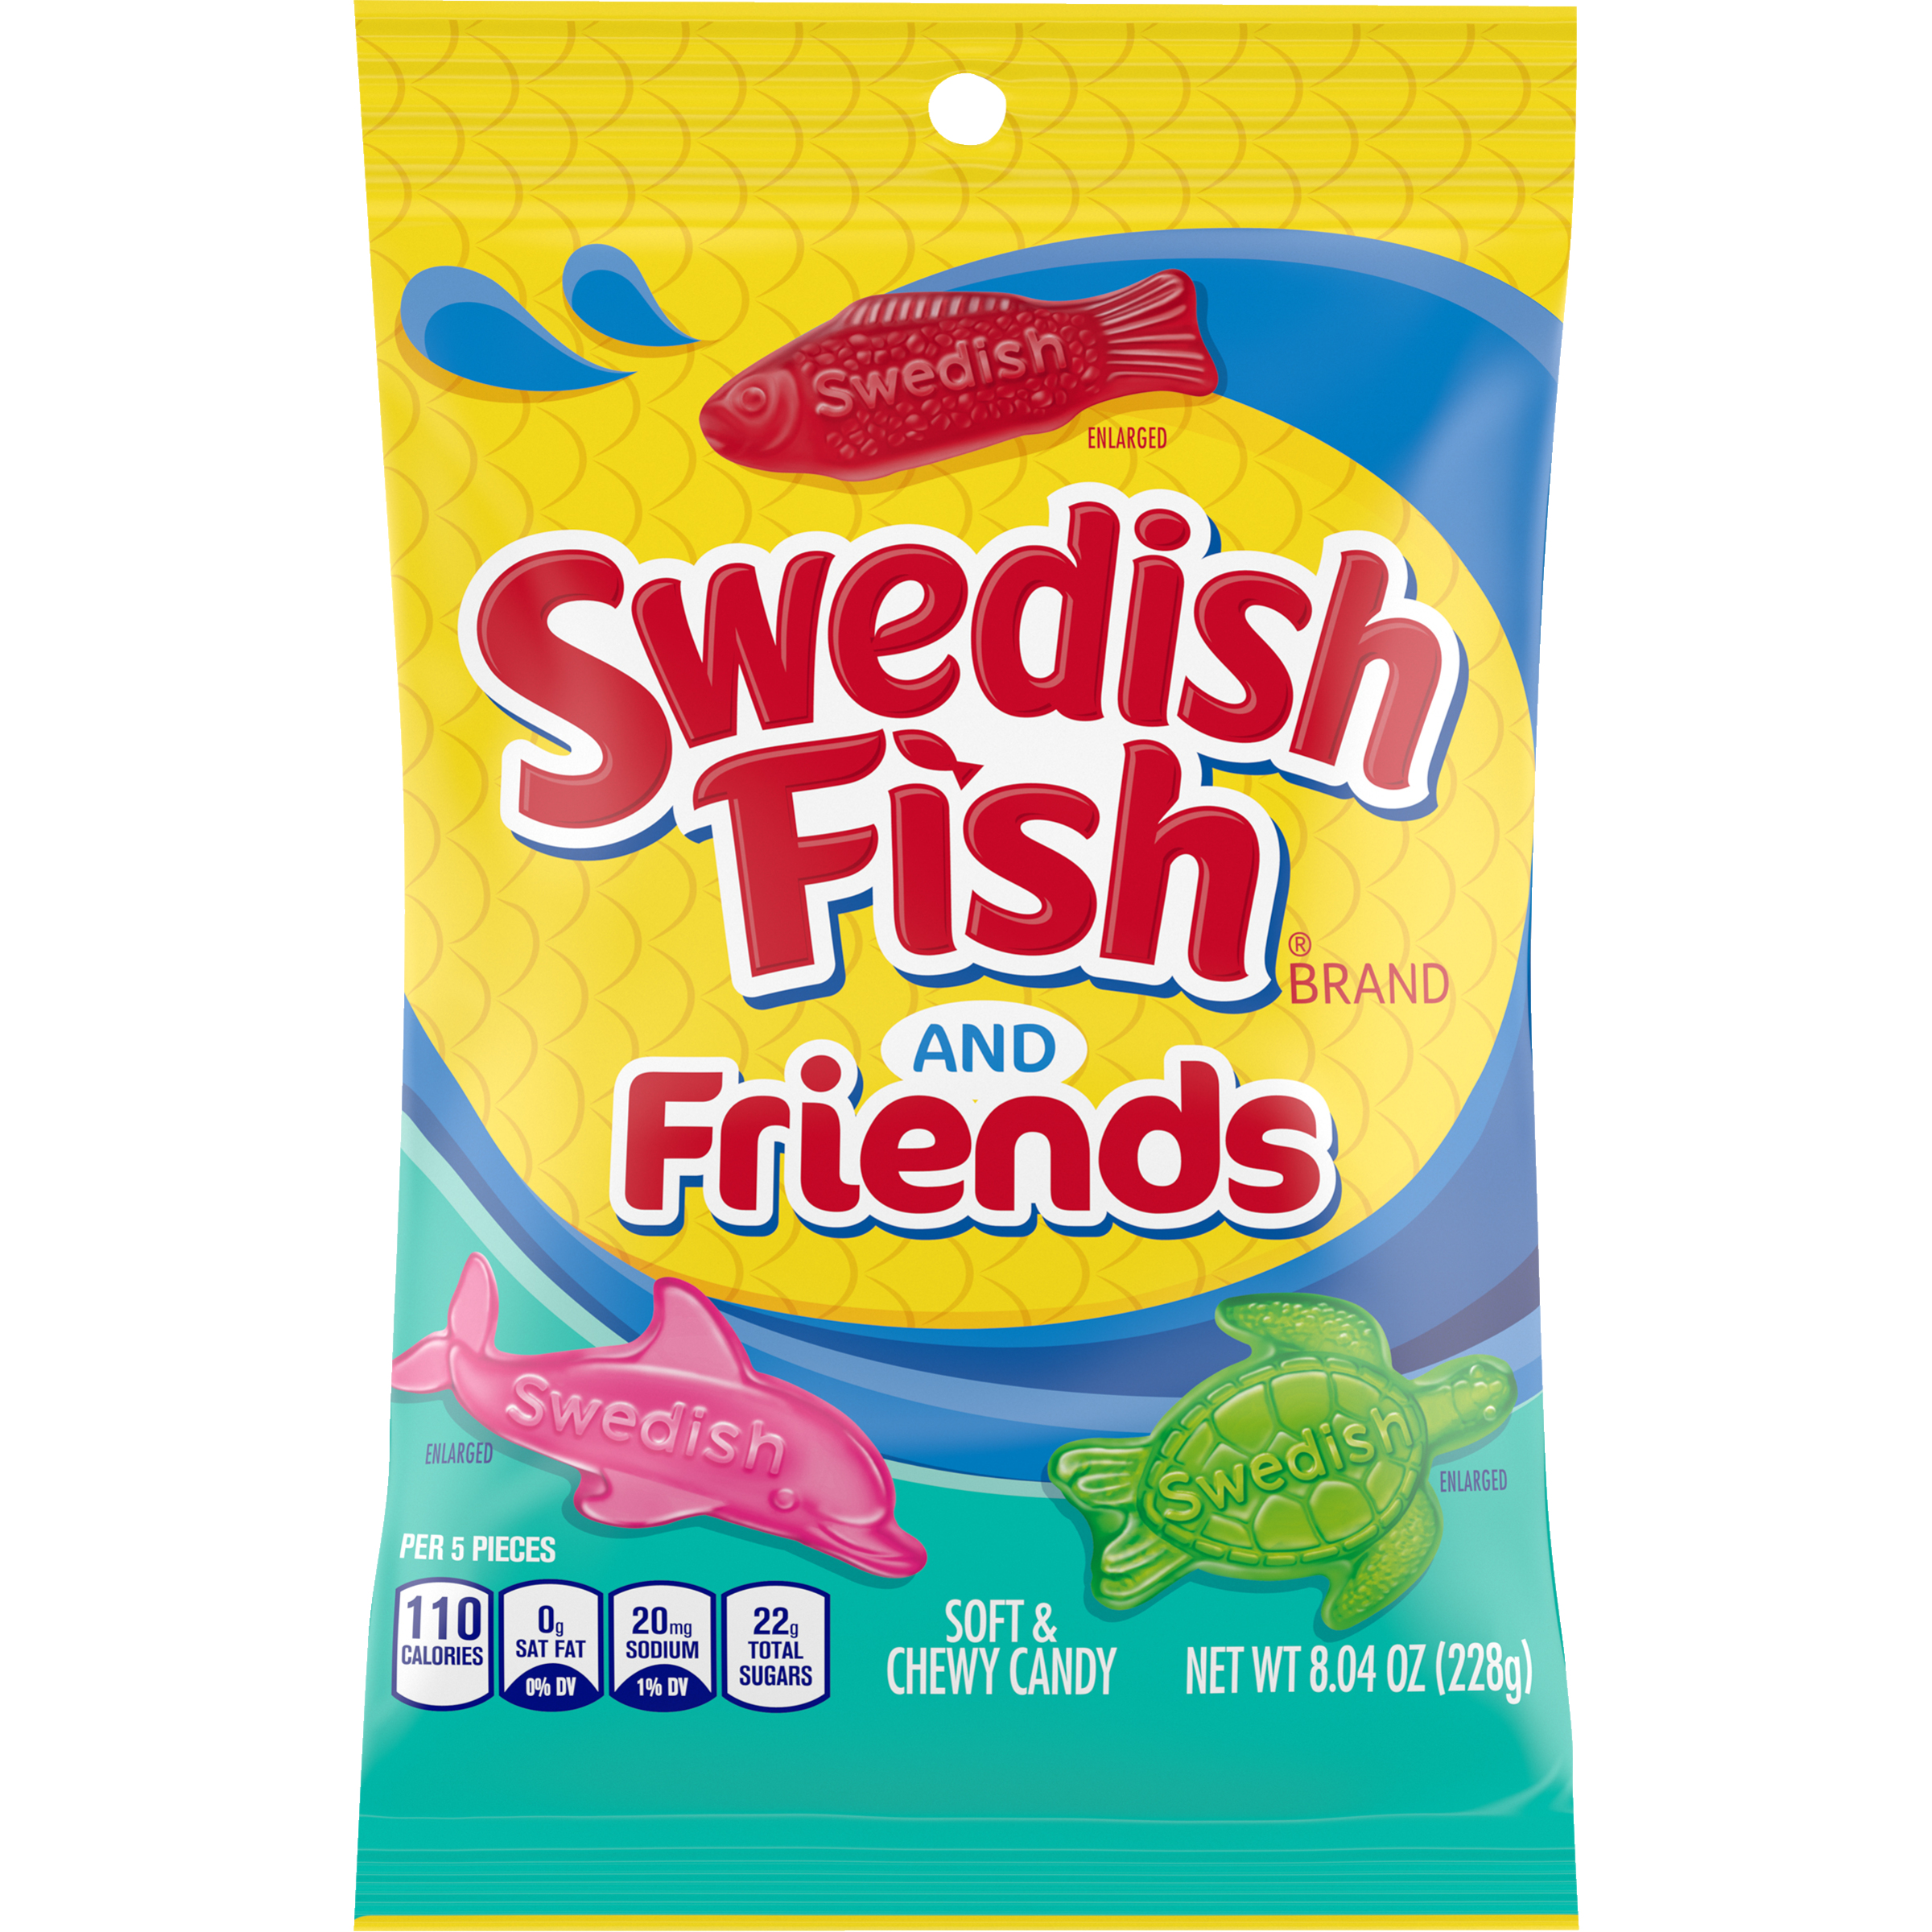 SWEDISH FISH and Friends Soft & Chewy Candy, 8.04 oz-1